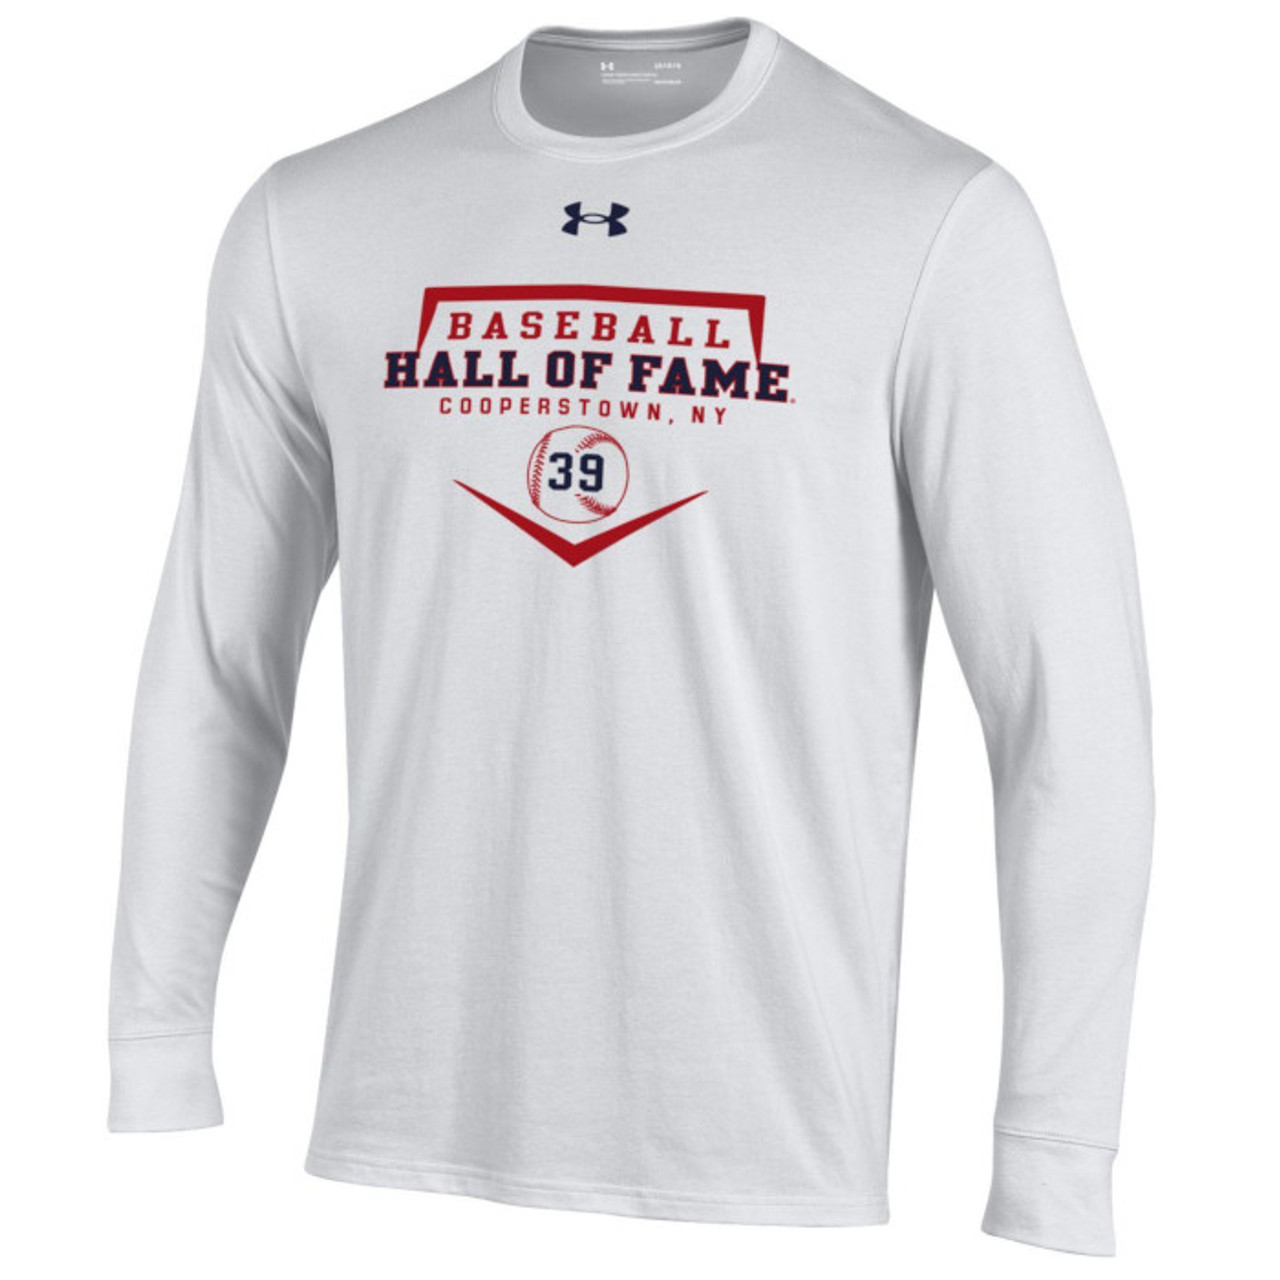 Under Armour Youth Baseball Hall of Fame Homeplate White